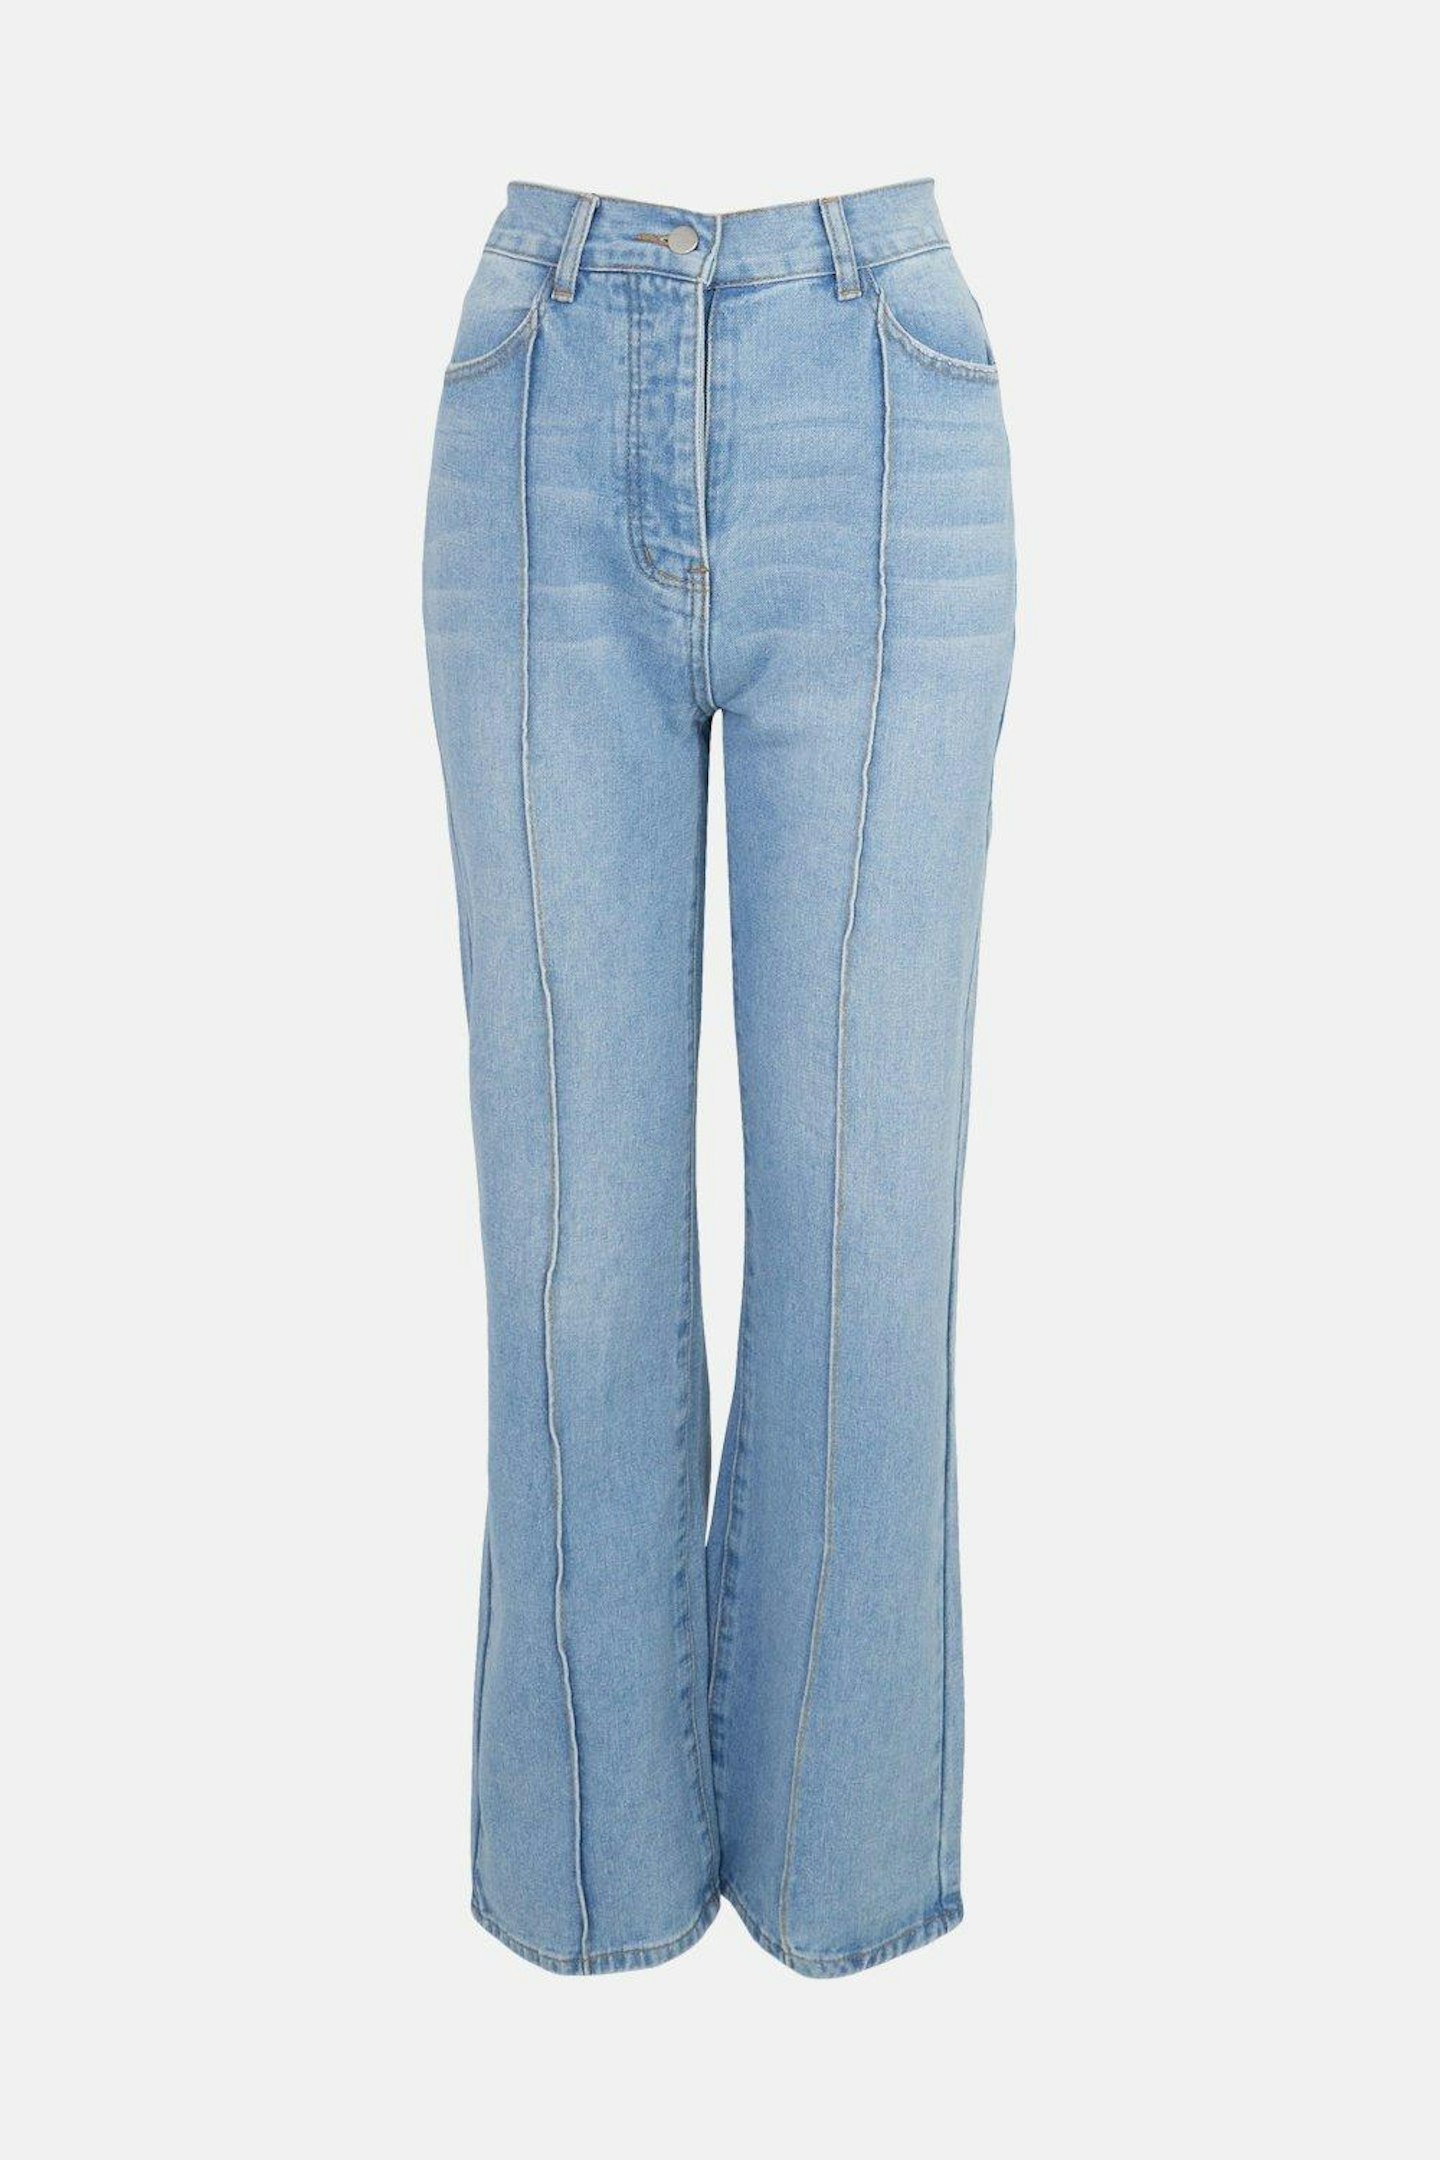 Warehouse, 75s Crease Stitch Detail Jeans, WAS £52 NOW £41.60